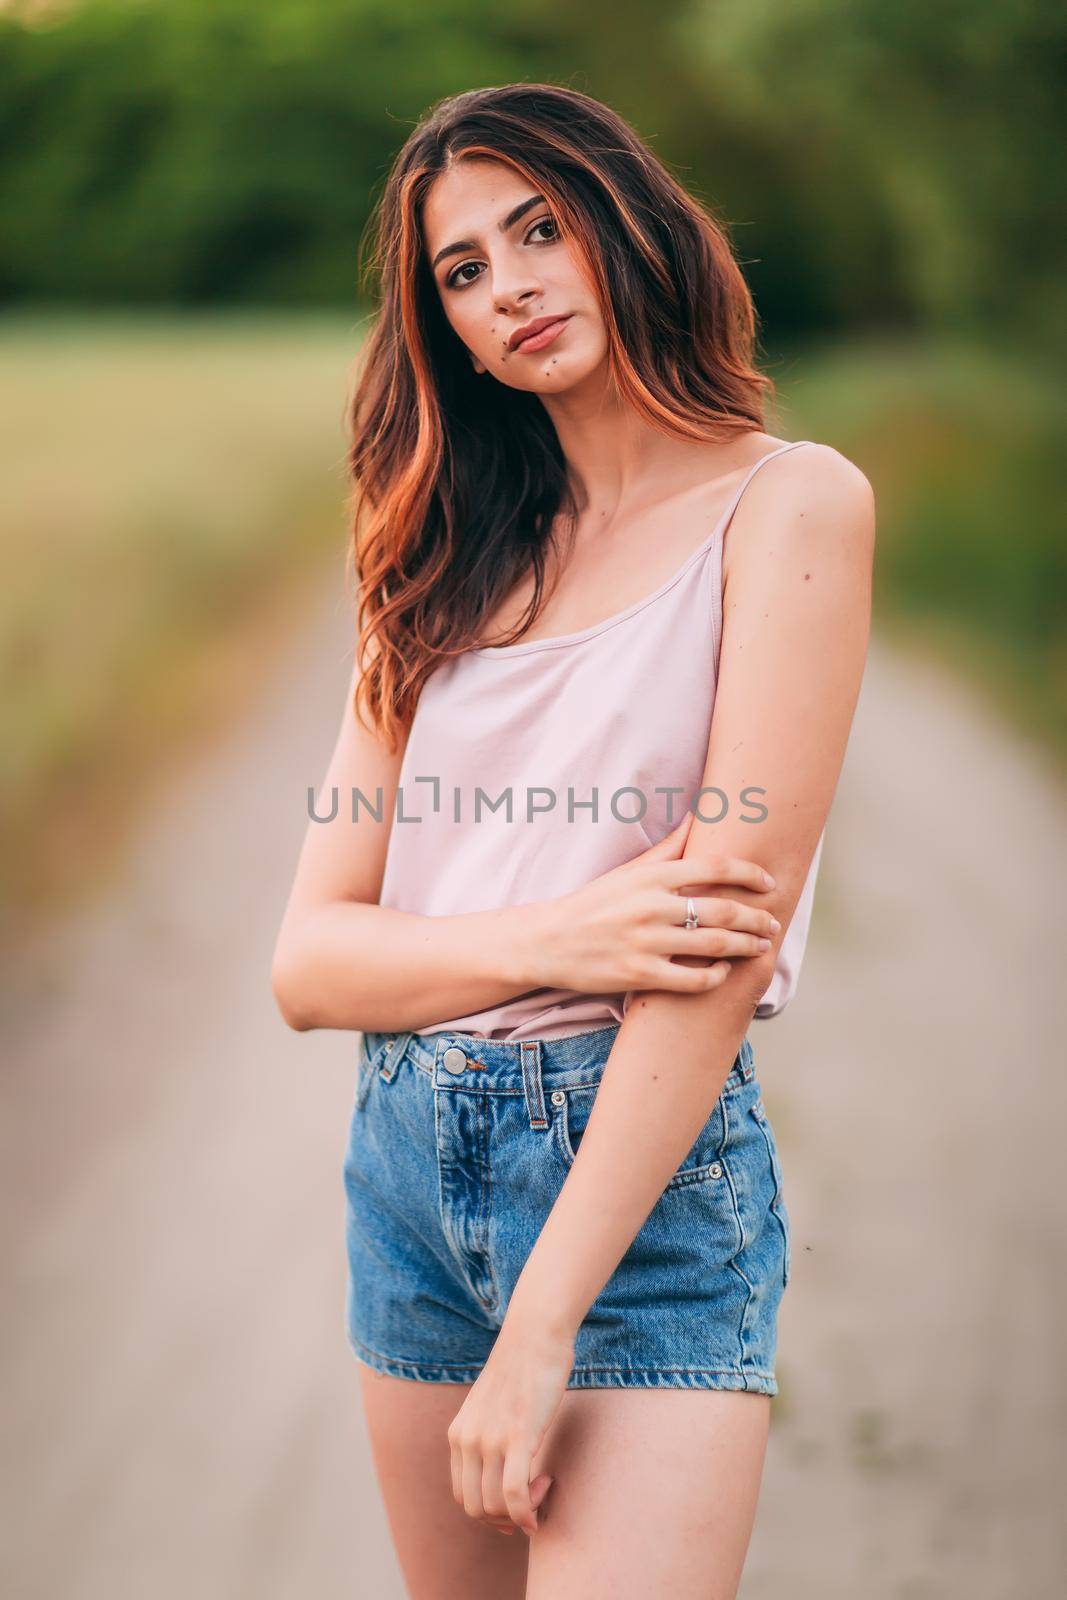 Portrait of beautiful sexy young woman with long brown hair in pink tank top and denim shorts posing outdoors at summer sunset, sensual, serious, blurry nature background